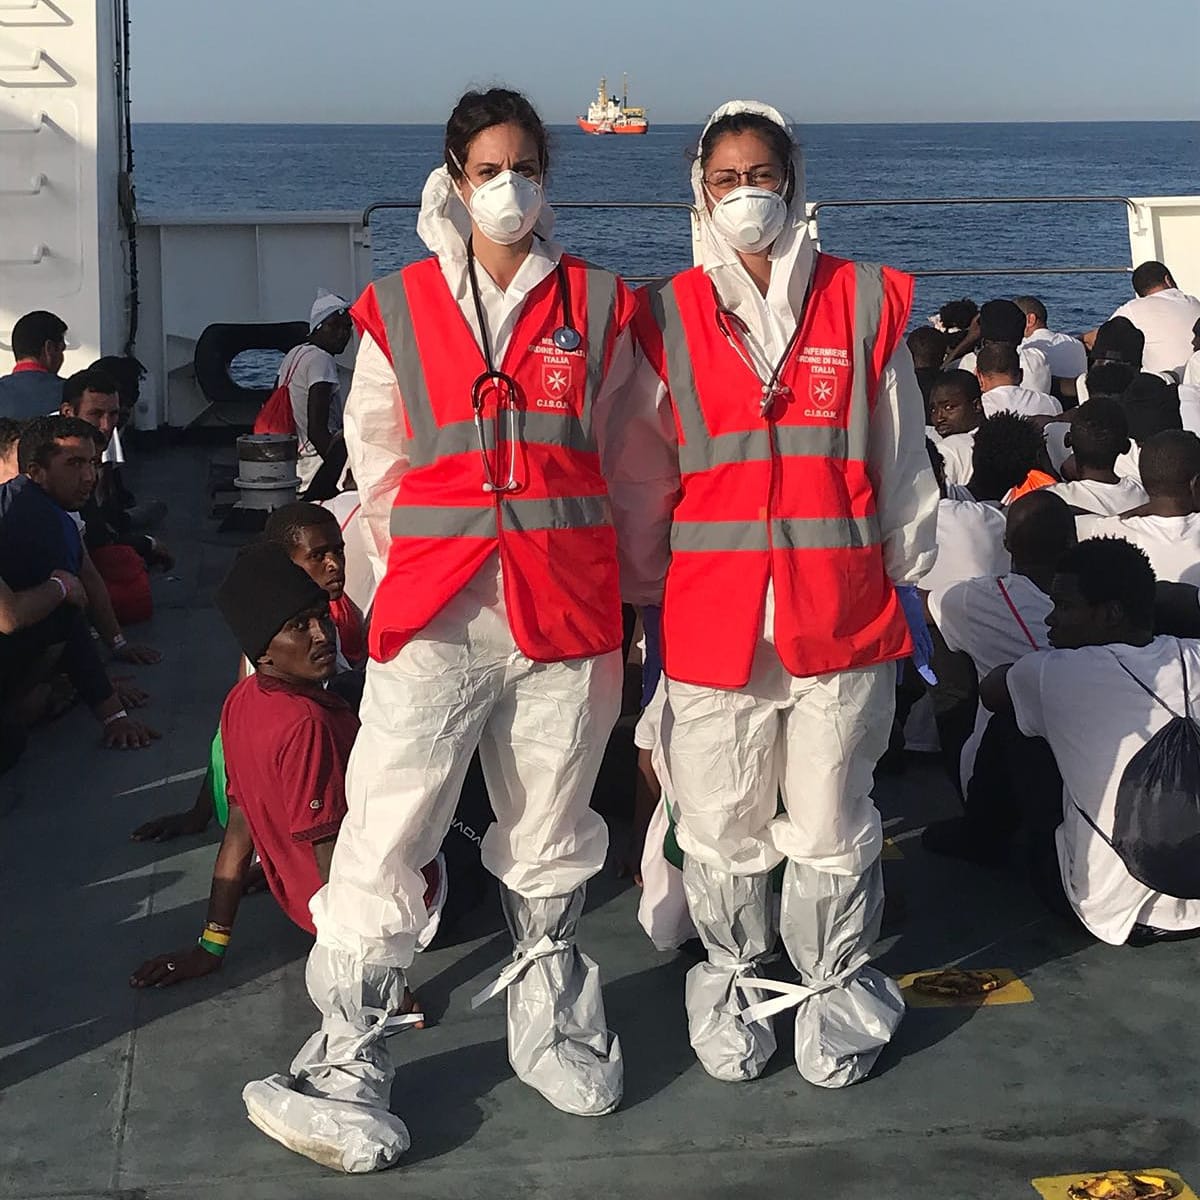 Aquarius Migrants, Order of Malta’s Medical Team on Dattilo: “In their eyes the hope for a better future”